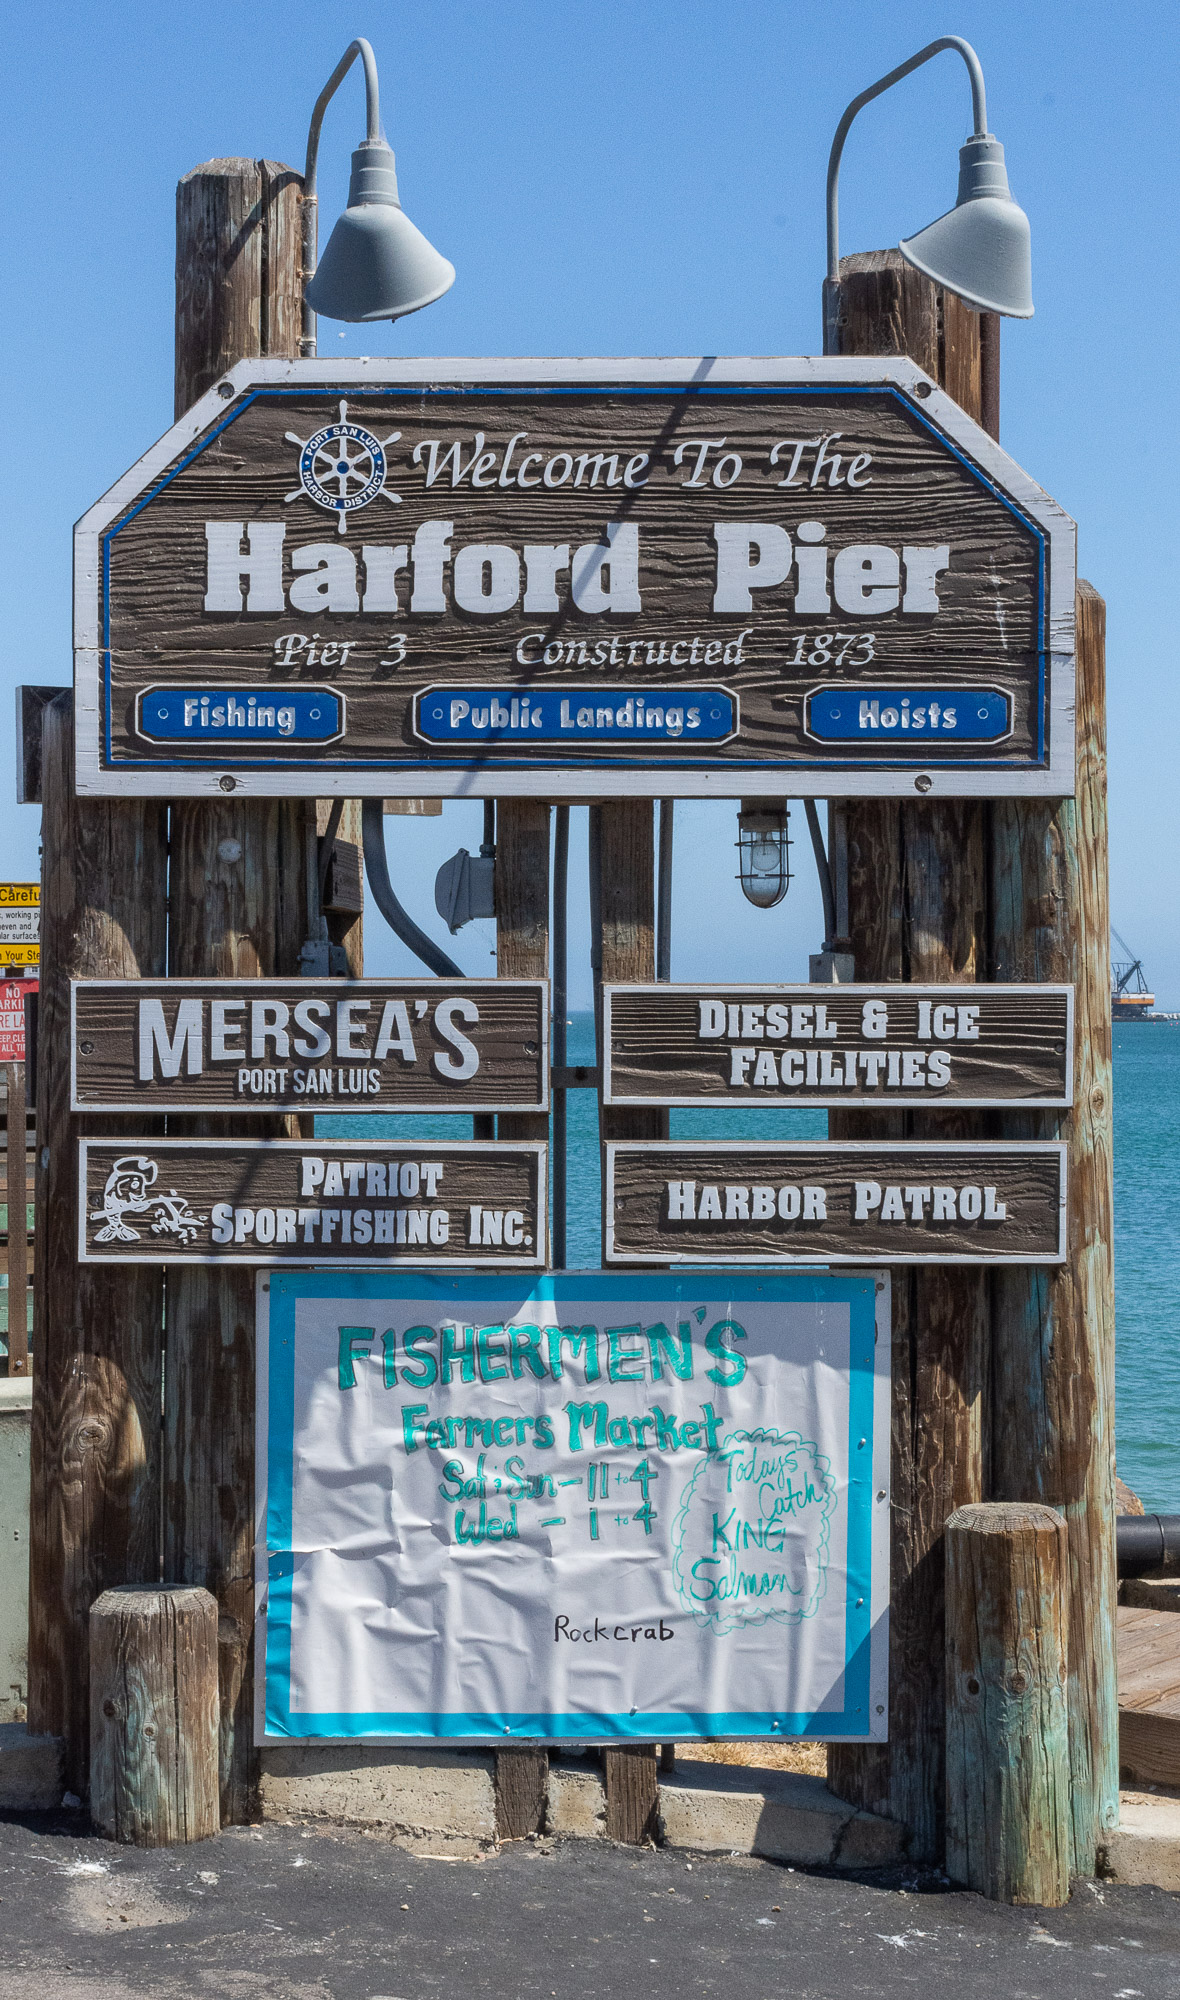 Welcome to Harford Pier